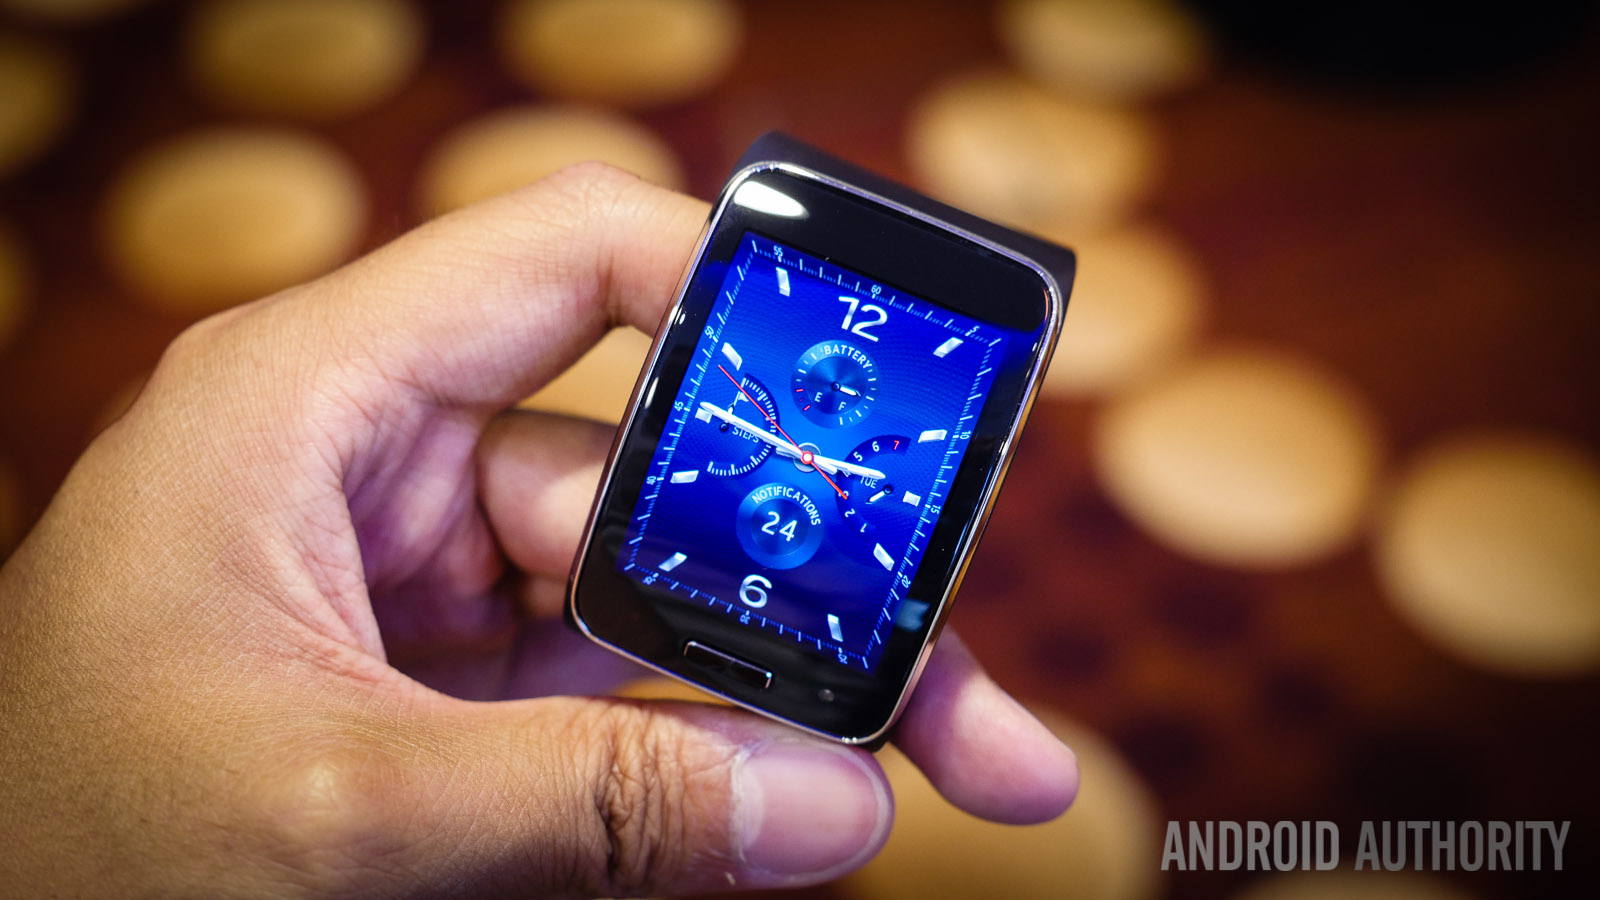 samsung gear s first look aa (1 of 6)